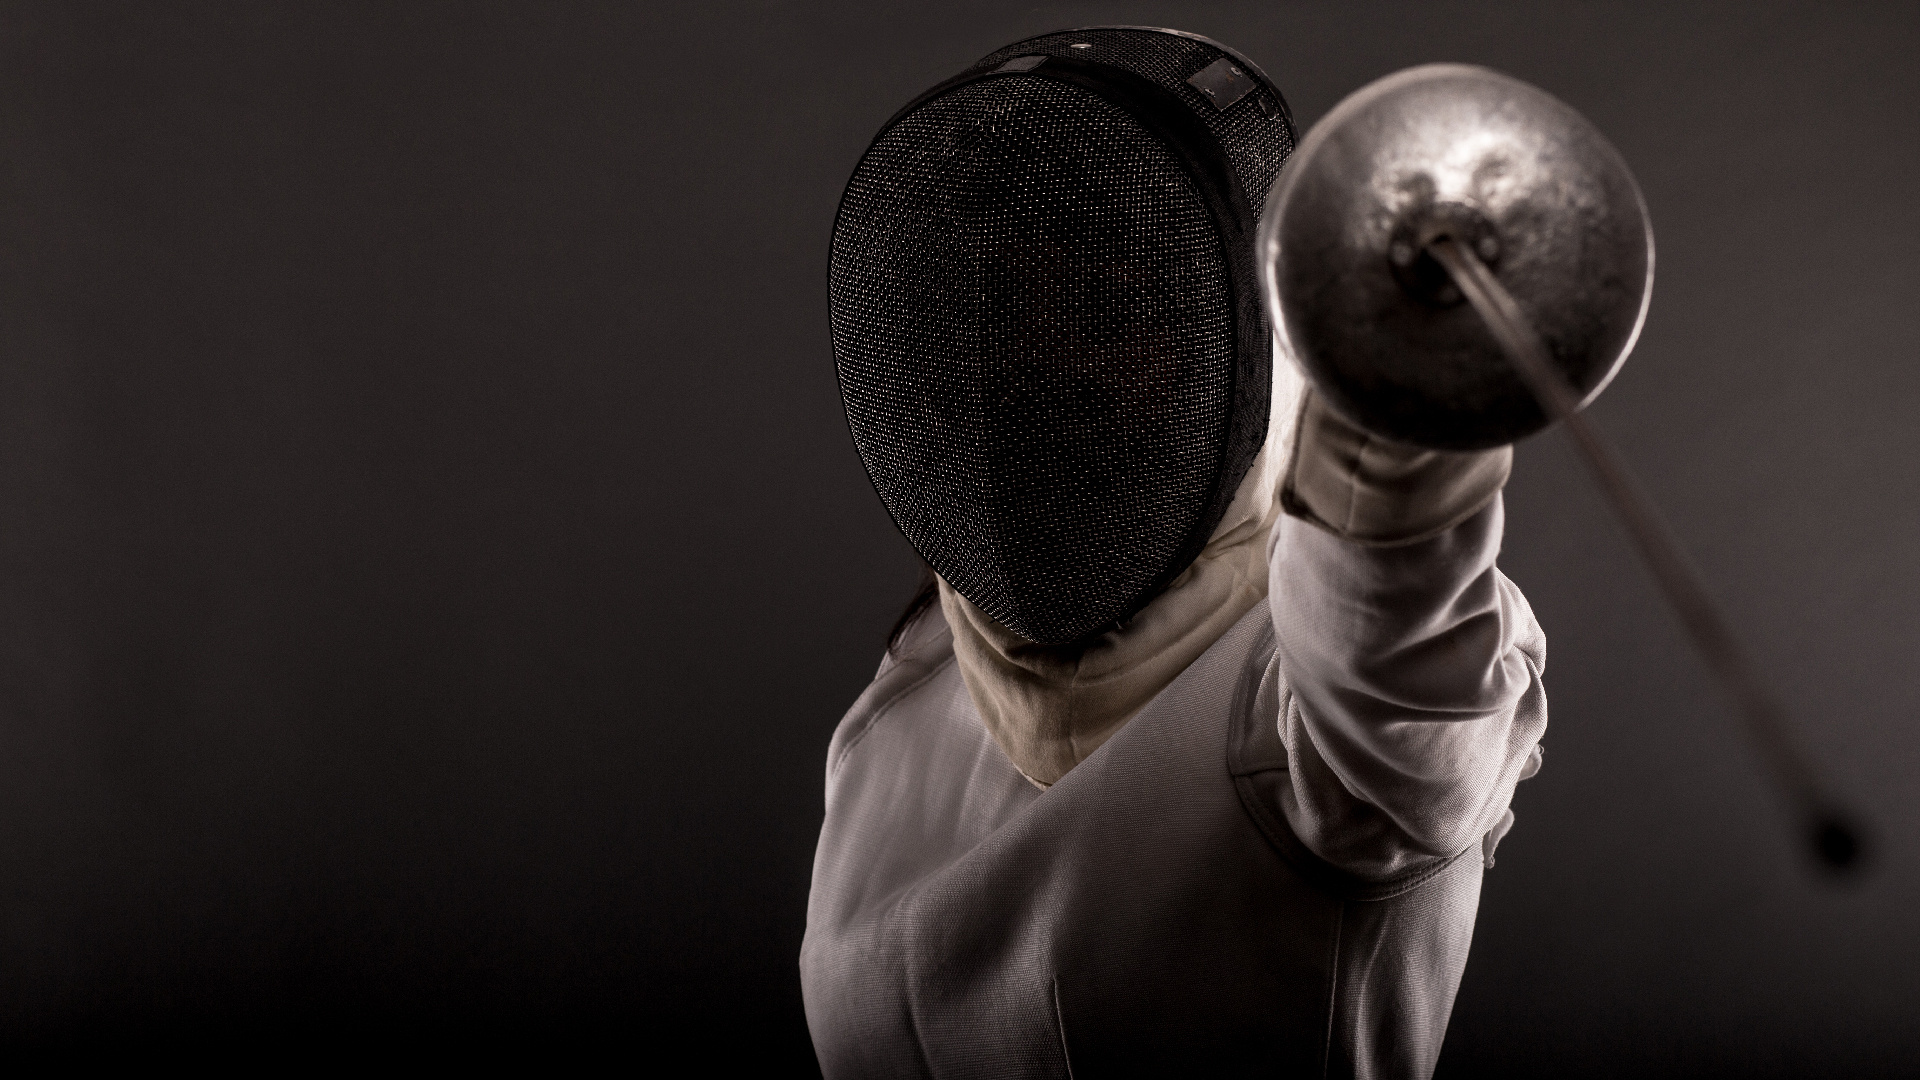 Fencing: The foil, Protective mask, An electrically conductive jacket, Protective equipment for the foil style of fencing. 1920x1080 Full HD Background.